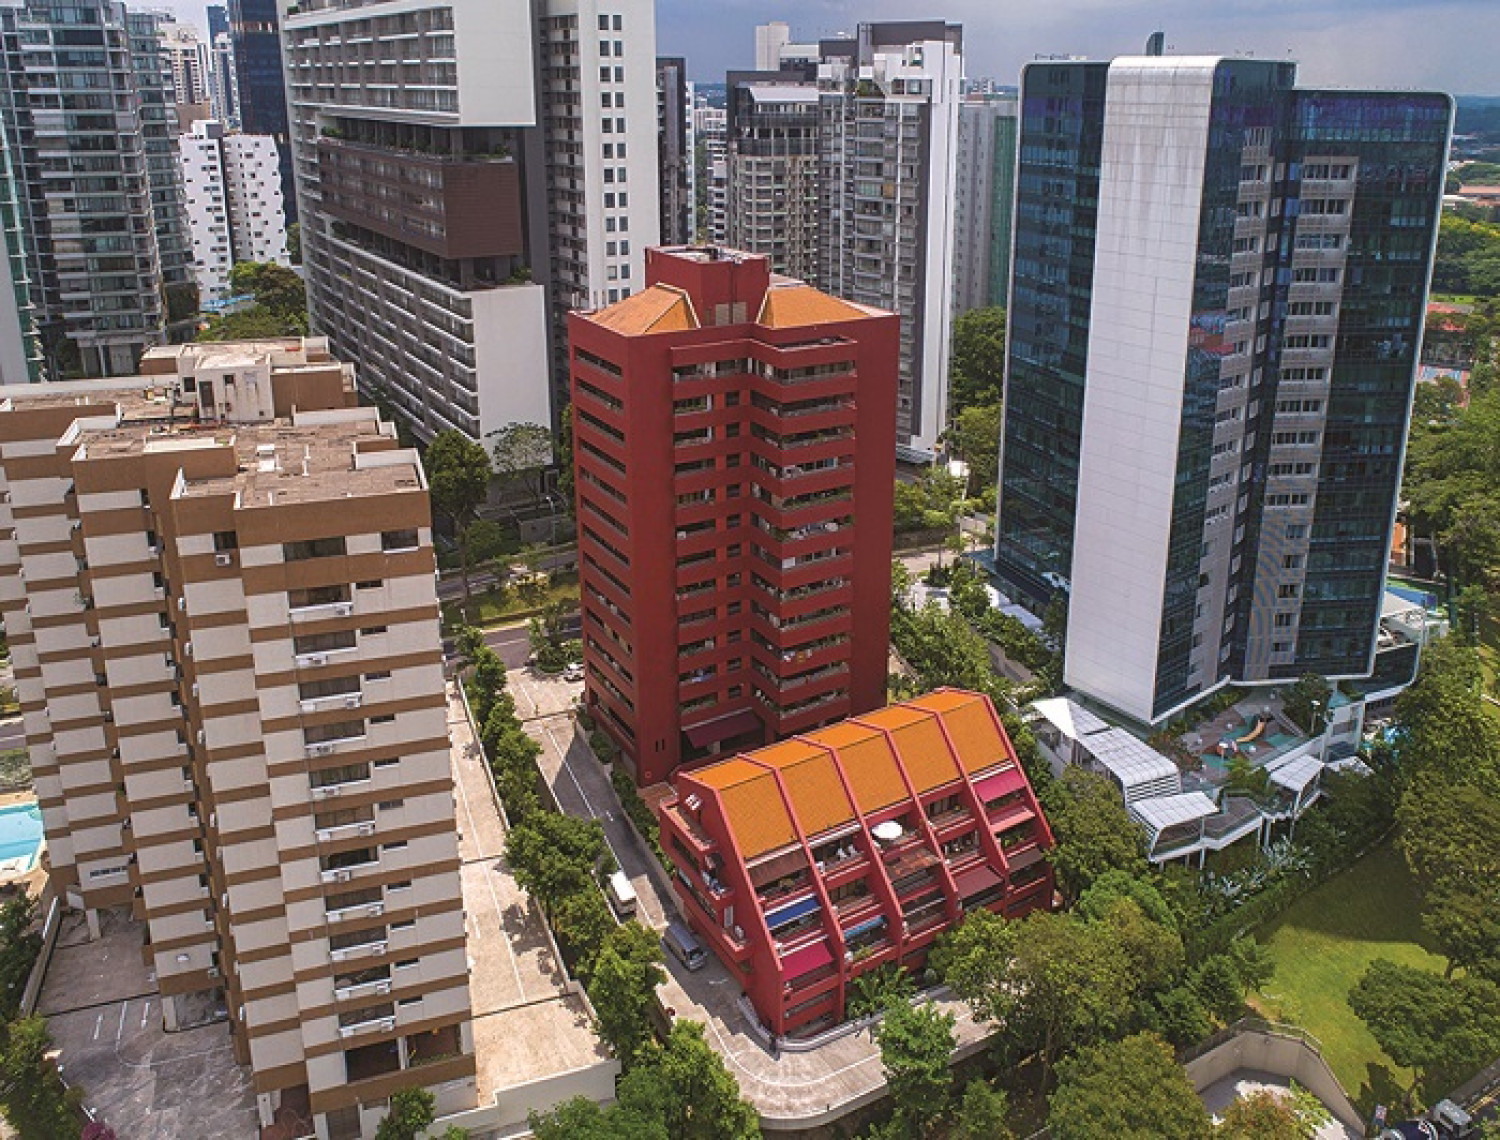 Eight more en bloc sales launched, more than half in prime districts - Property News